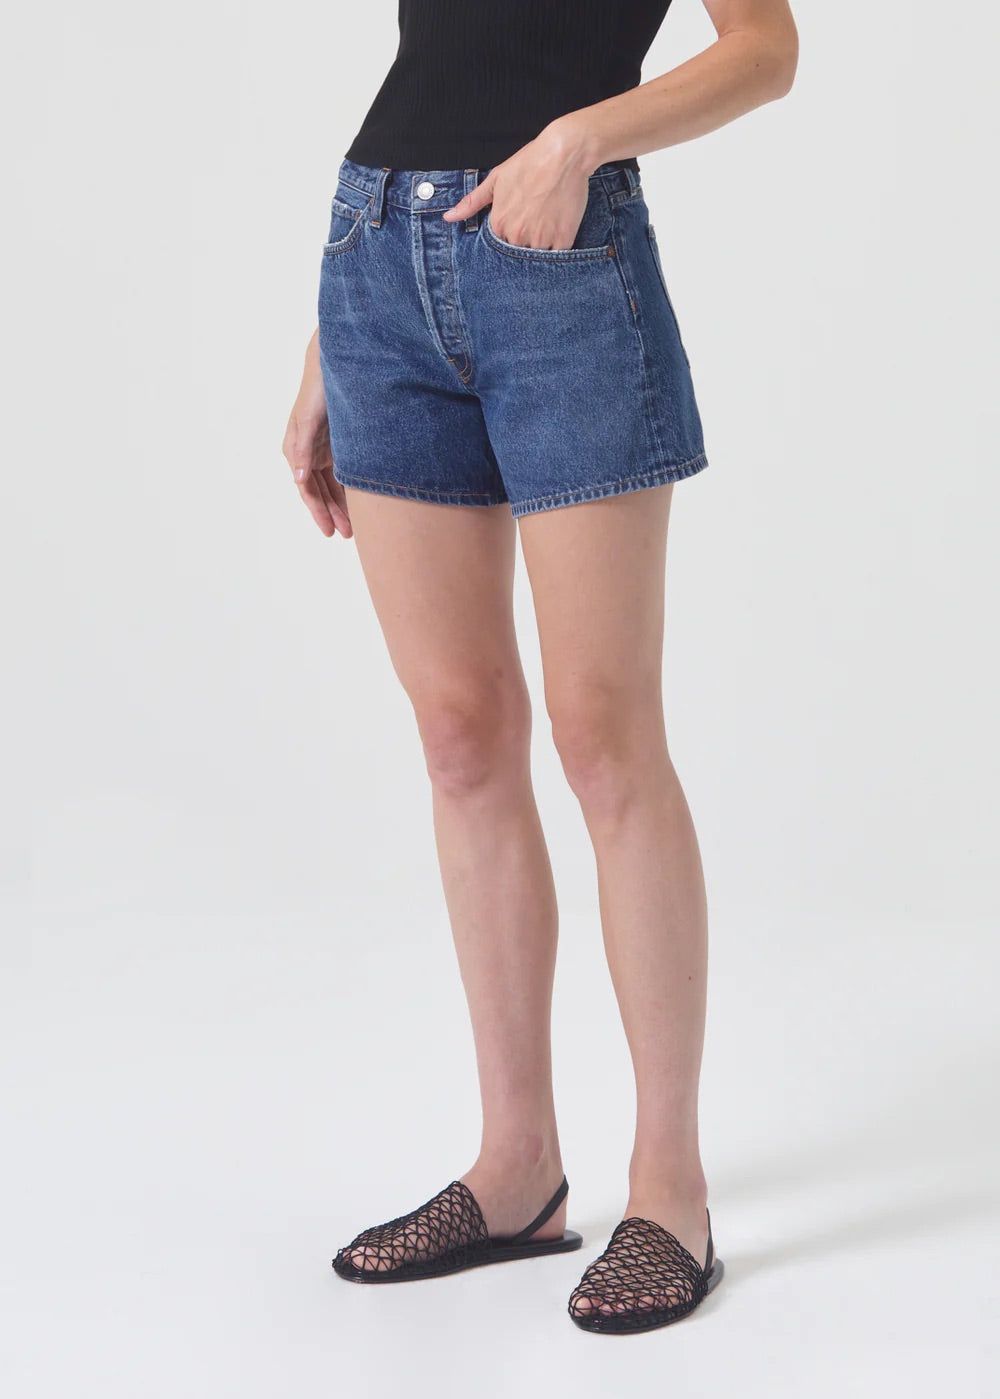 Parker Long Shorts in Enamour